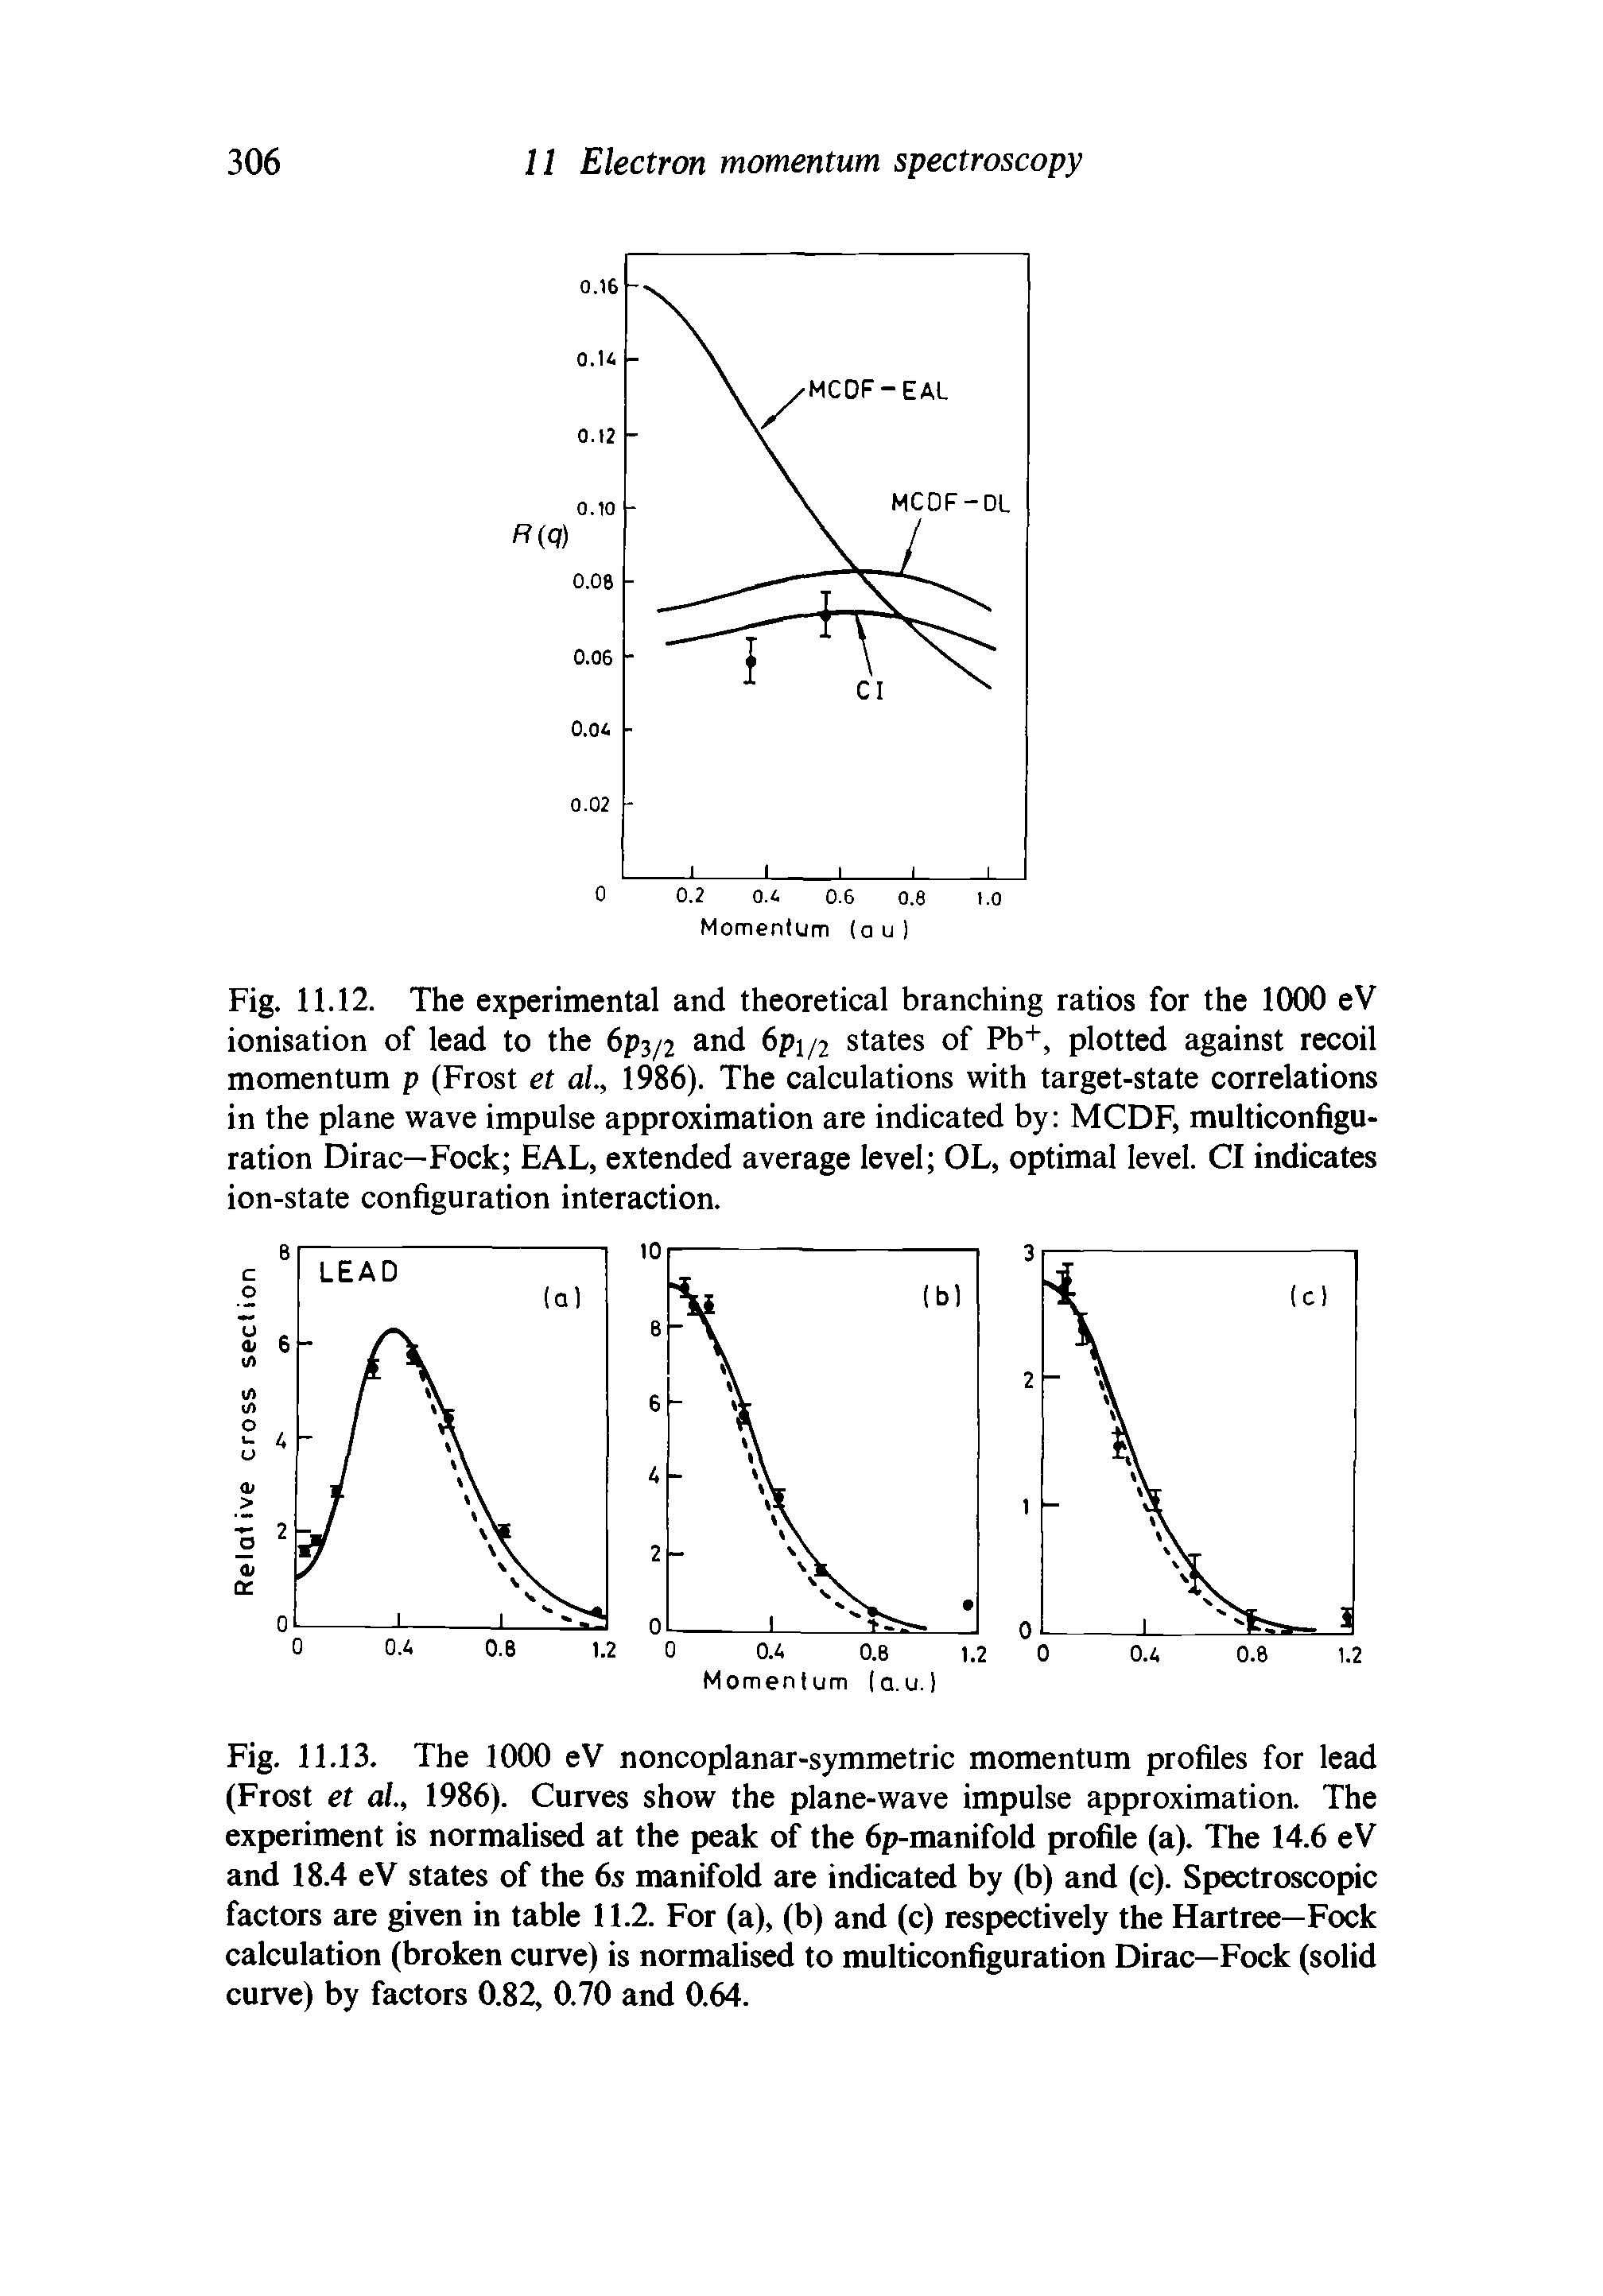 Fig. 11.12. The experimental and theoretical branching ratios for the 1000 eV ionisation of lead to the 6ps/2 and 6pi/2 states of Pb+, plotted against recoil momentum p (Frost et al, 1986). The calculations with target-state correlations in the plane wave impulse approximation are indicated by MCDF, multiconfiguration Dirac—Fock EAL, extended average level OL, optimal level. Cl indicates ion-state configuration interaction.